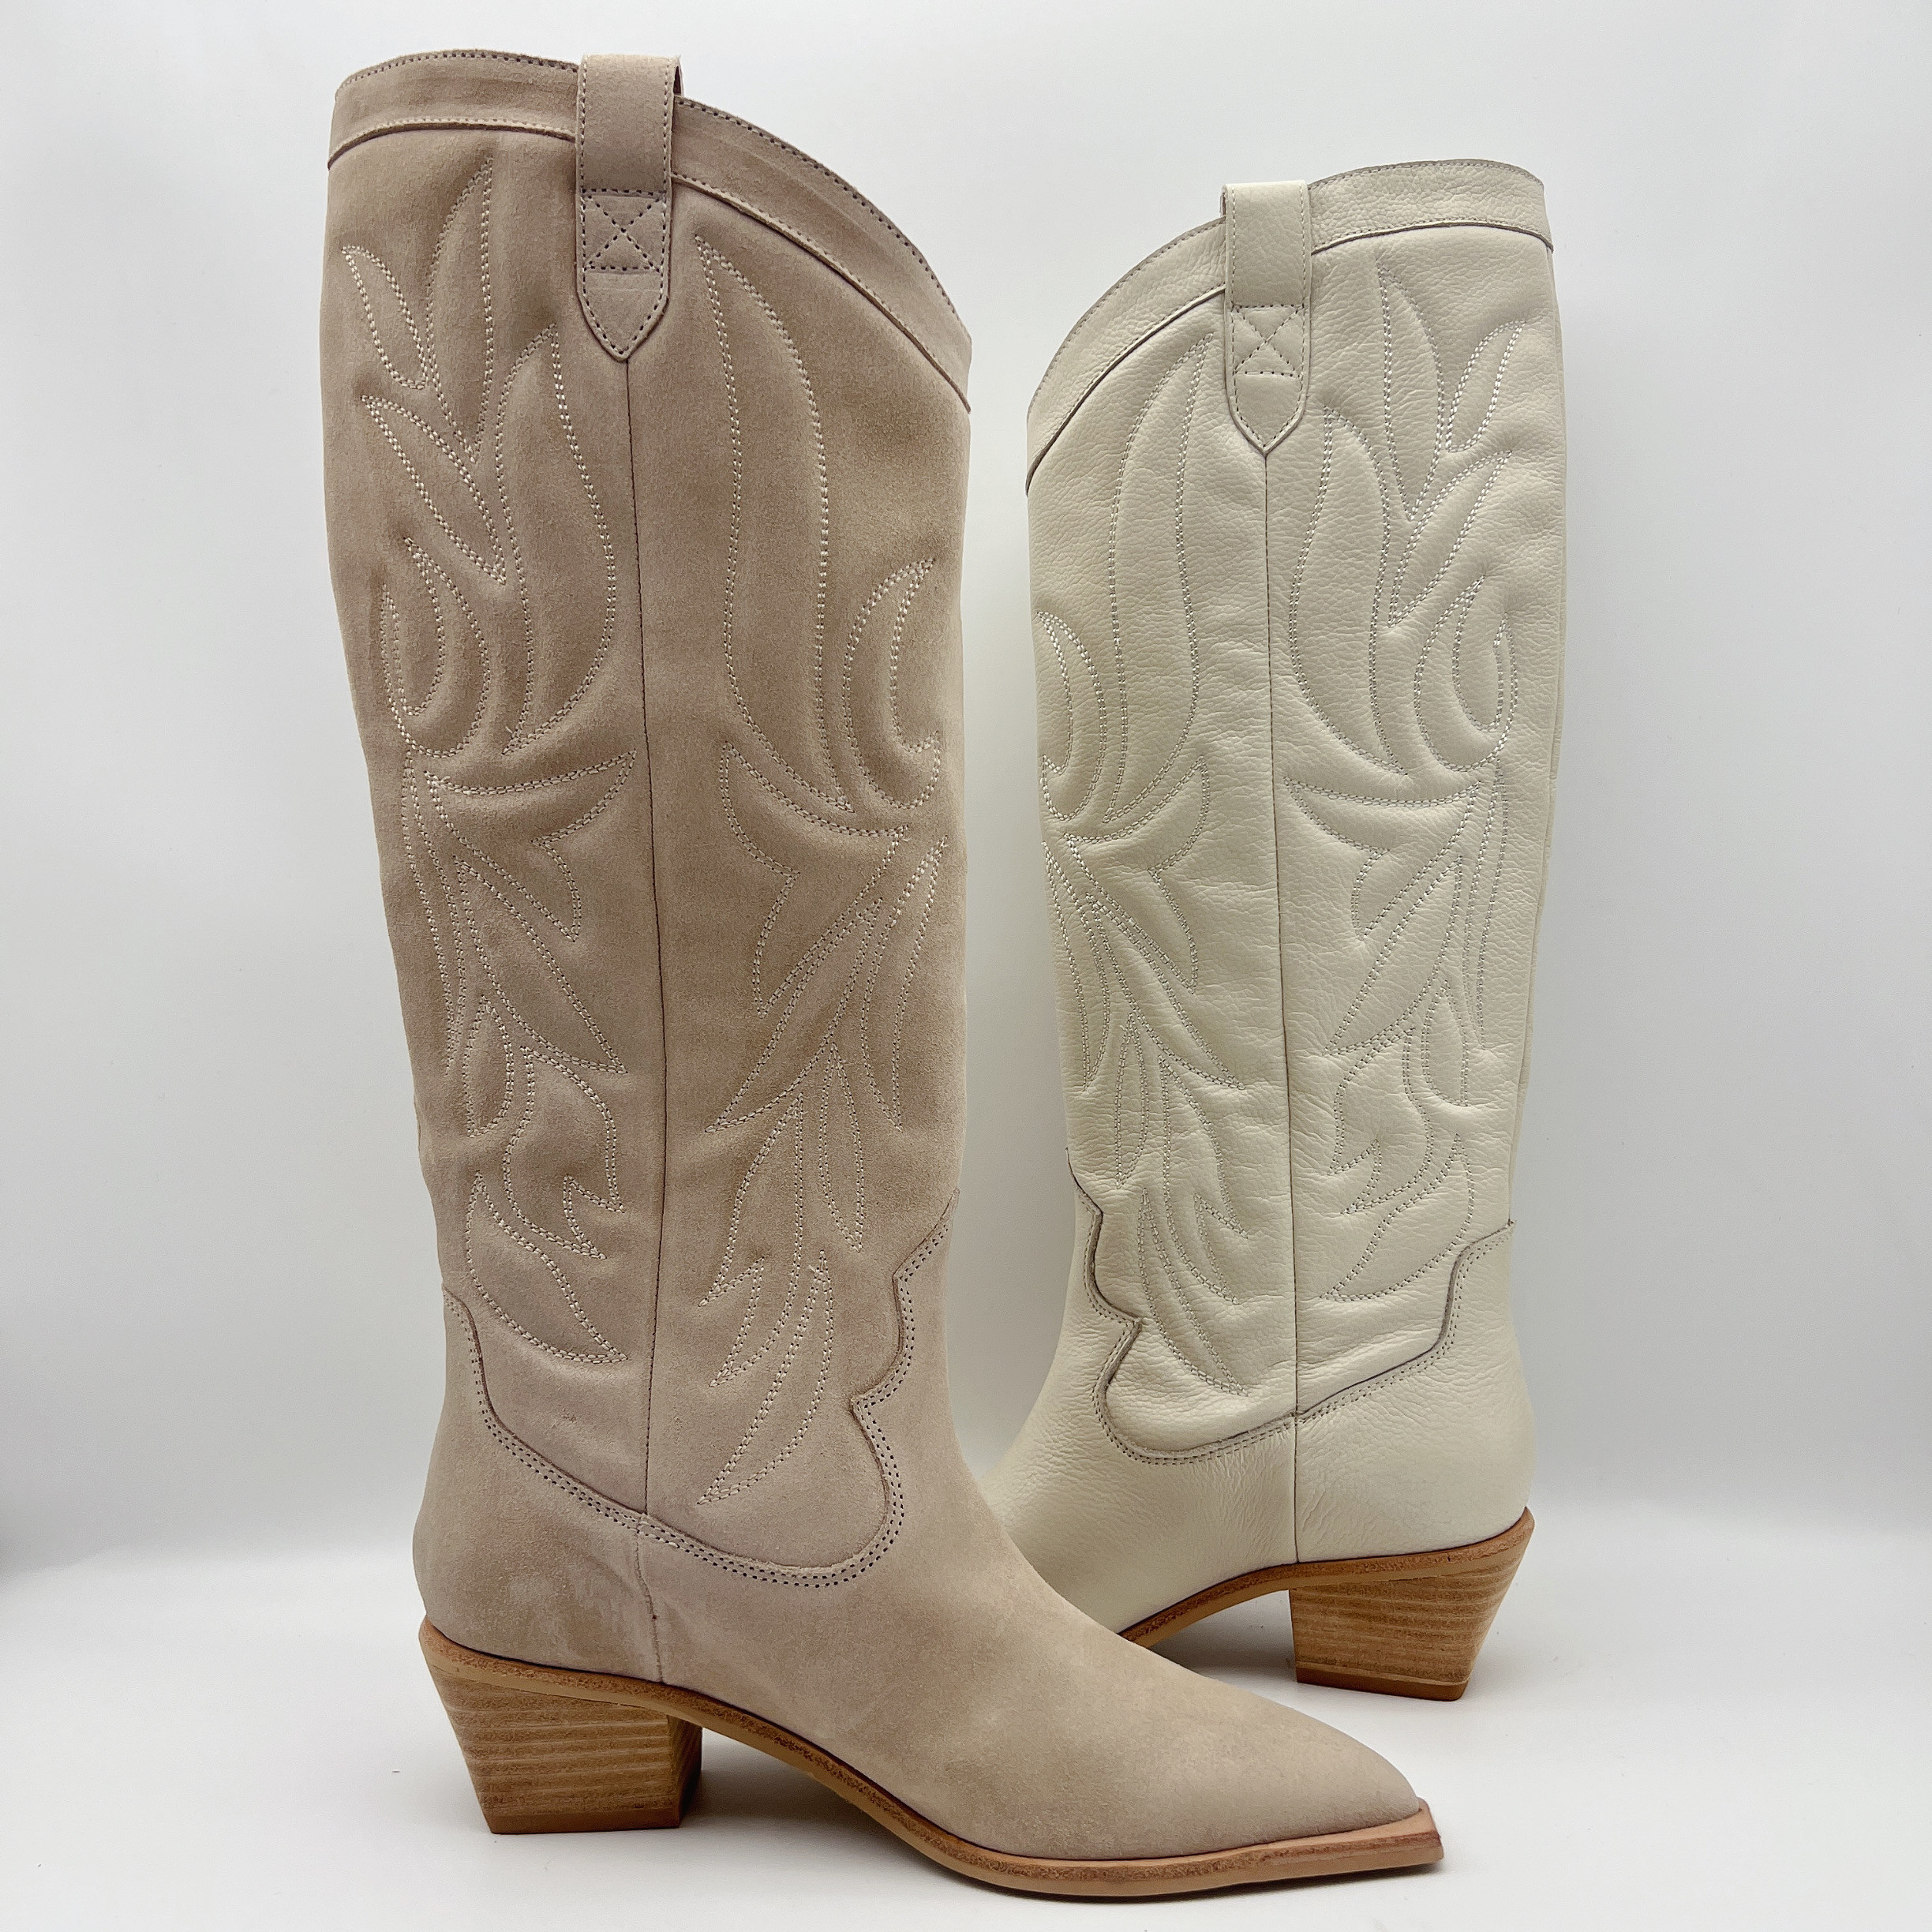 Best Comfortable Womens Leather Dress Boots Waterproof Off White wholesale